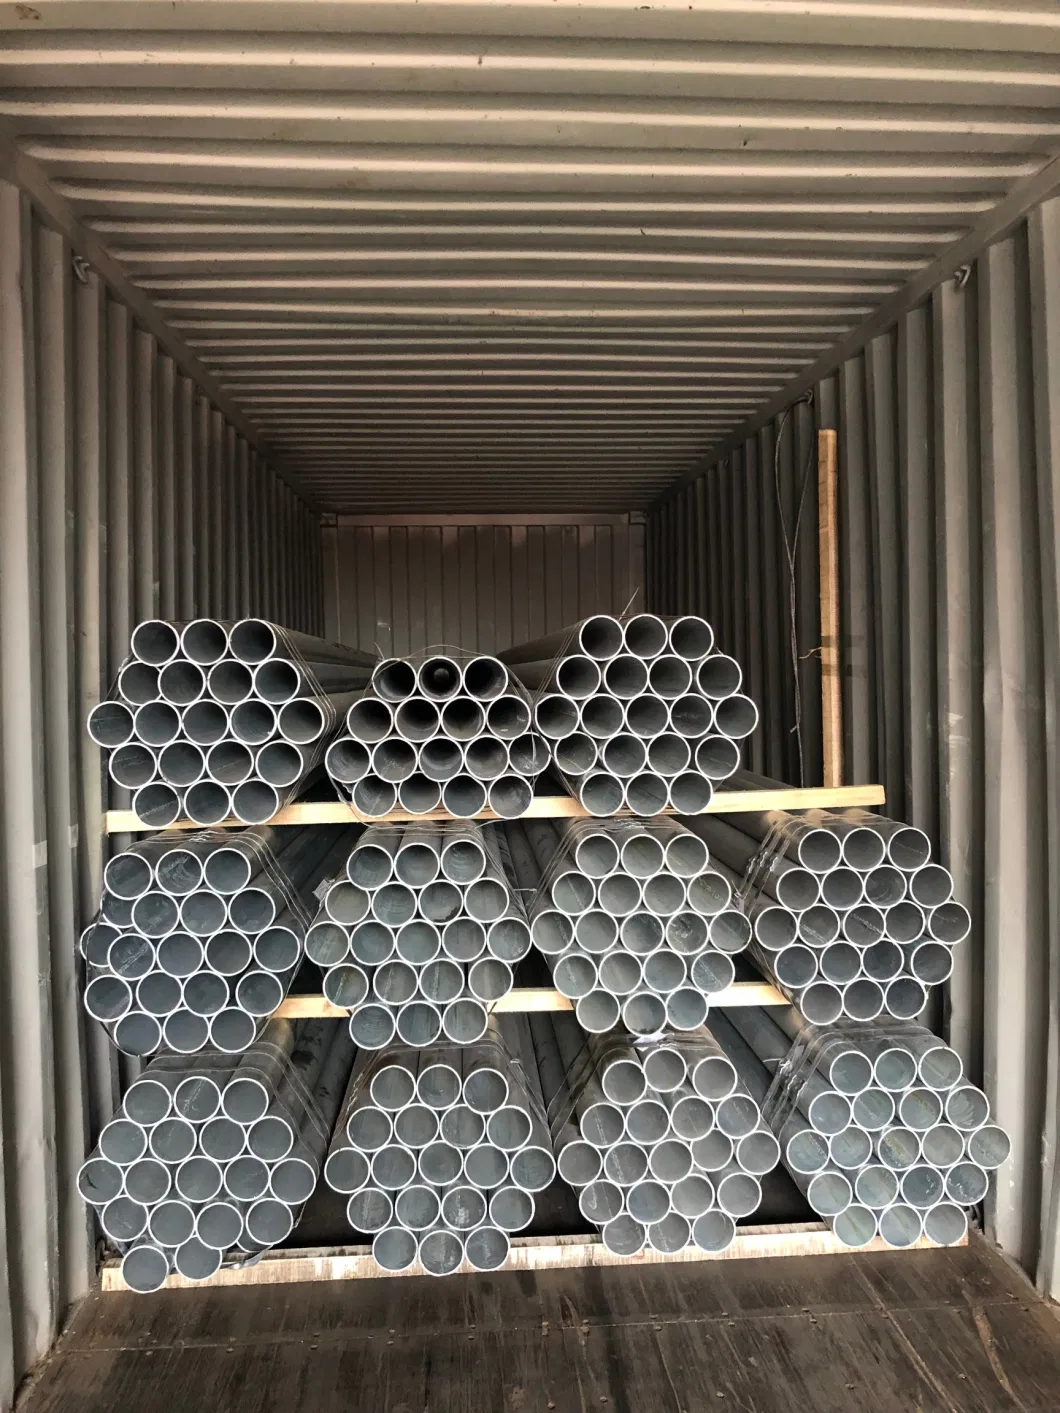 As1163 C250 165mm Round Galvanized Iron Steel Pipe for Building